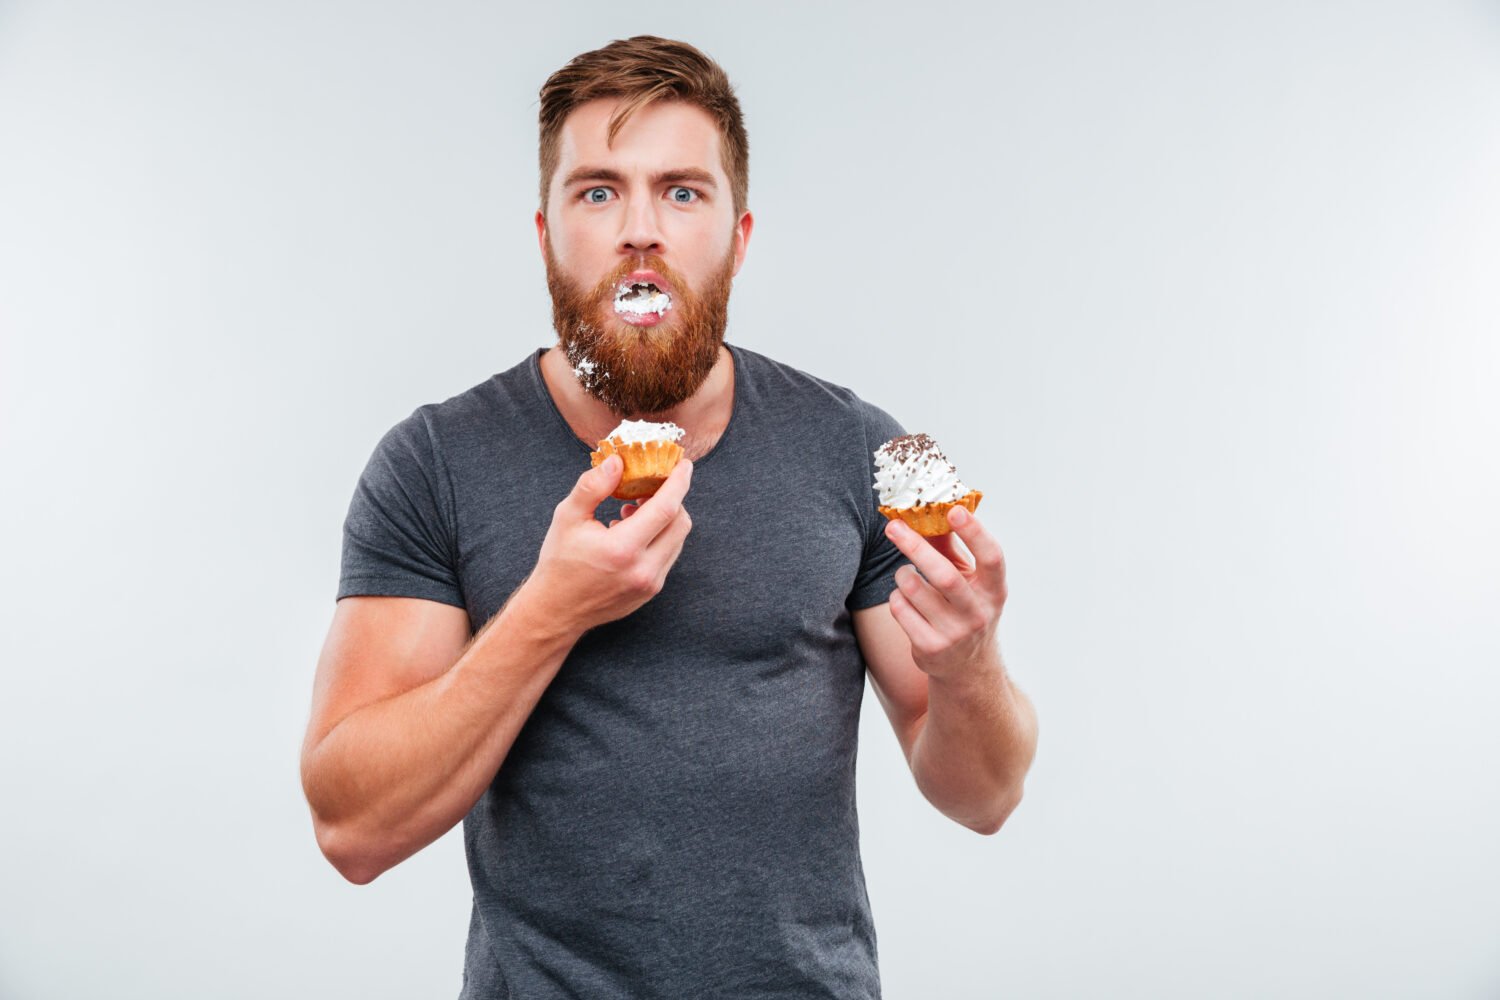 Filthy bearded young man eating cream cakes isolated on white background